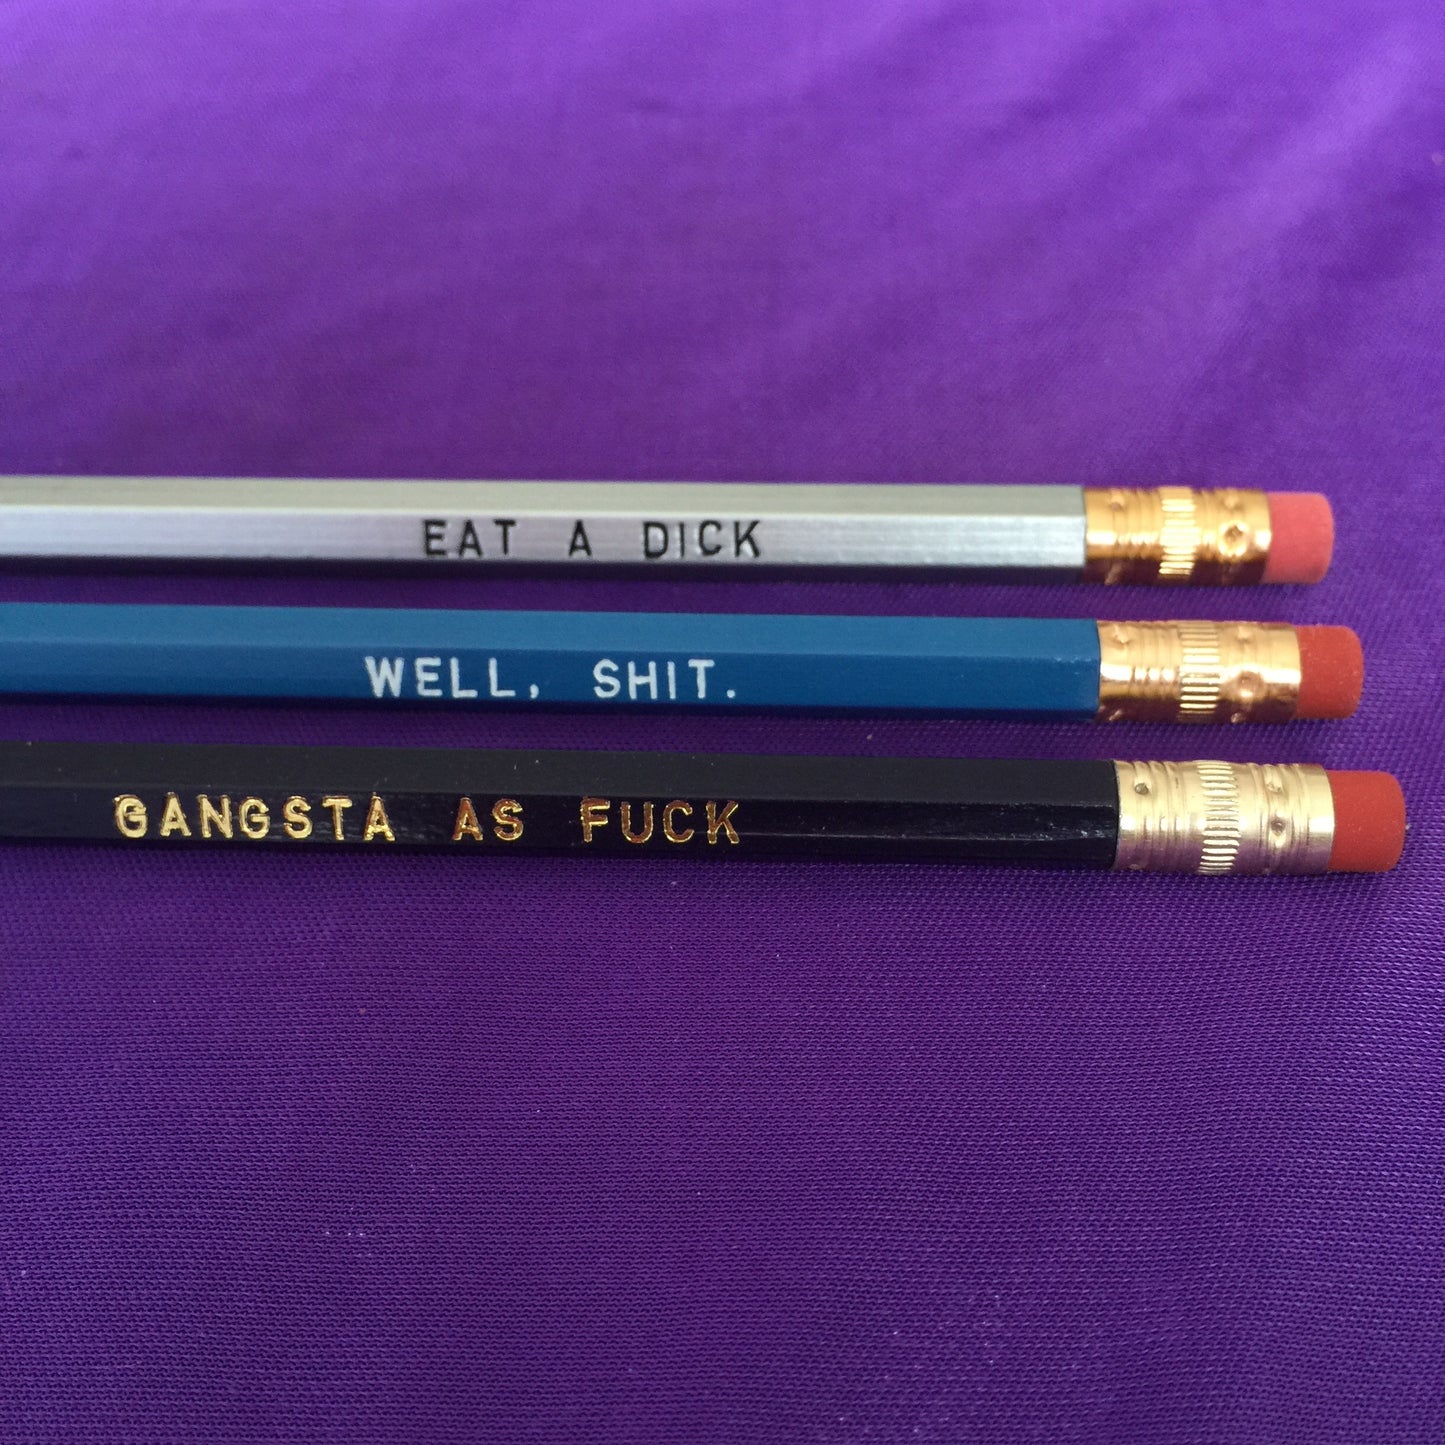 Sweary Pencils - Assorted Blue